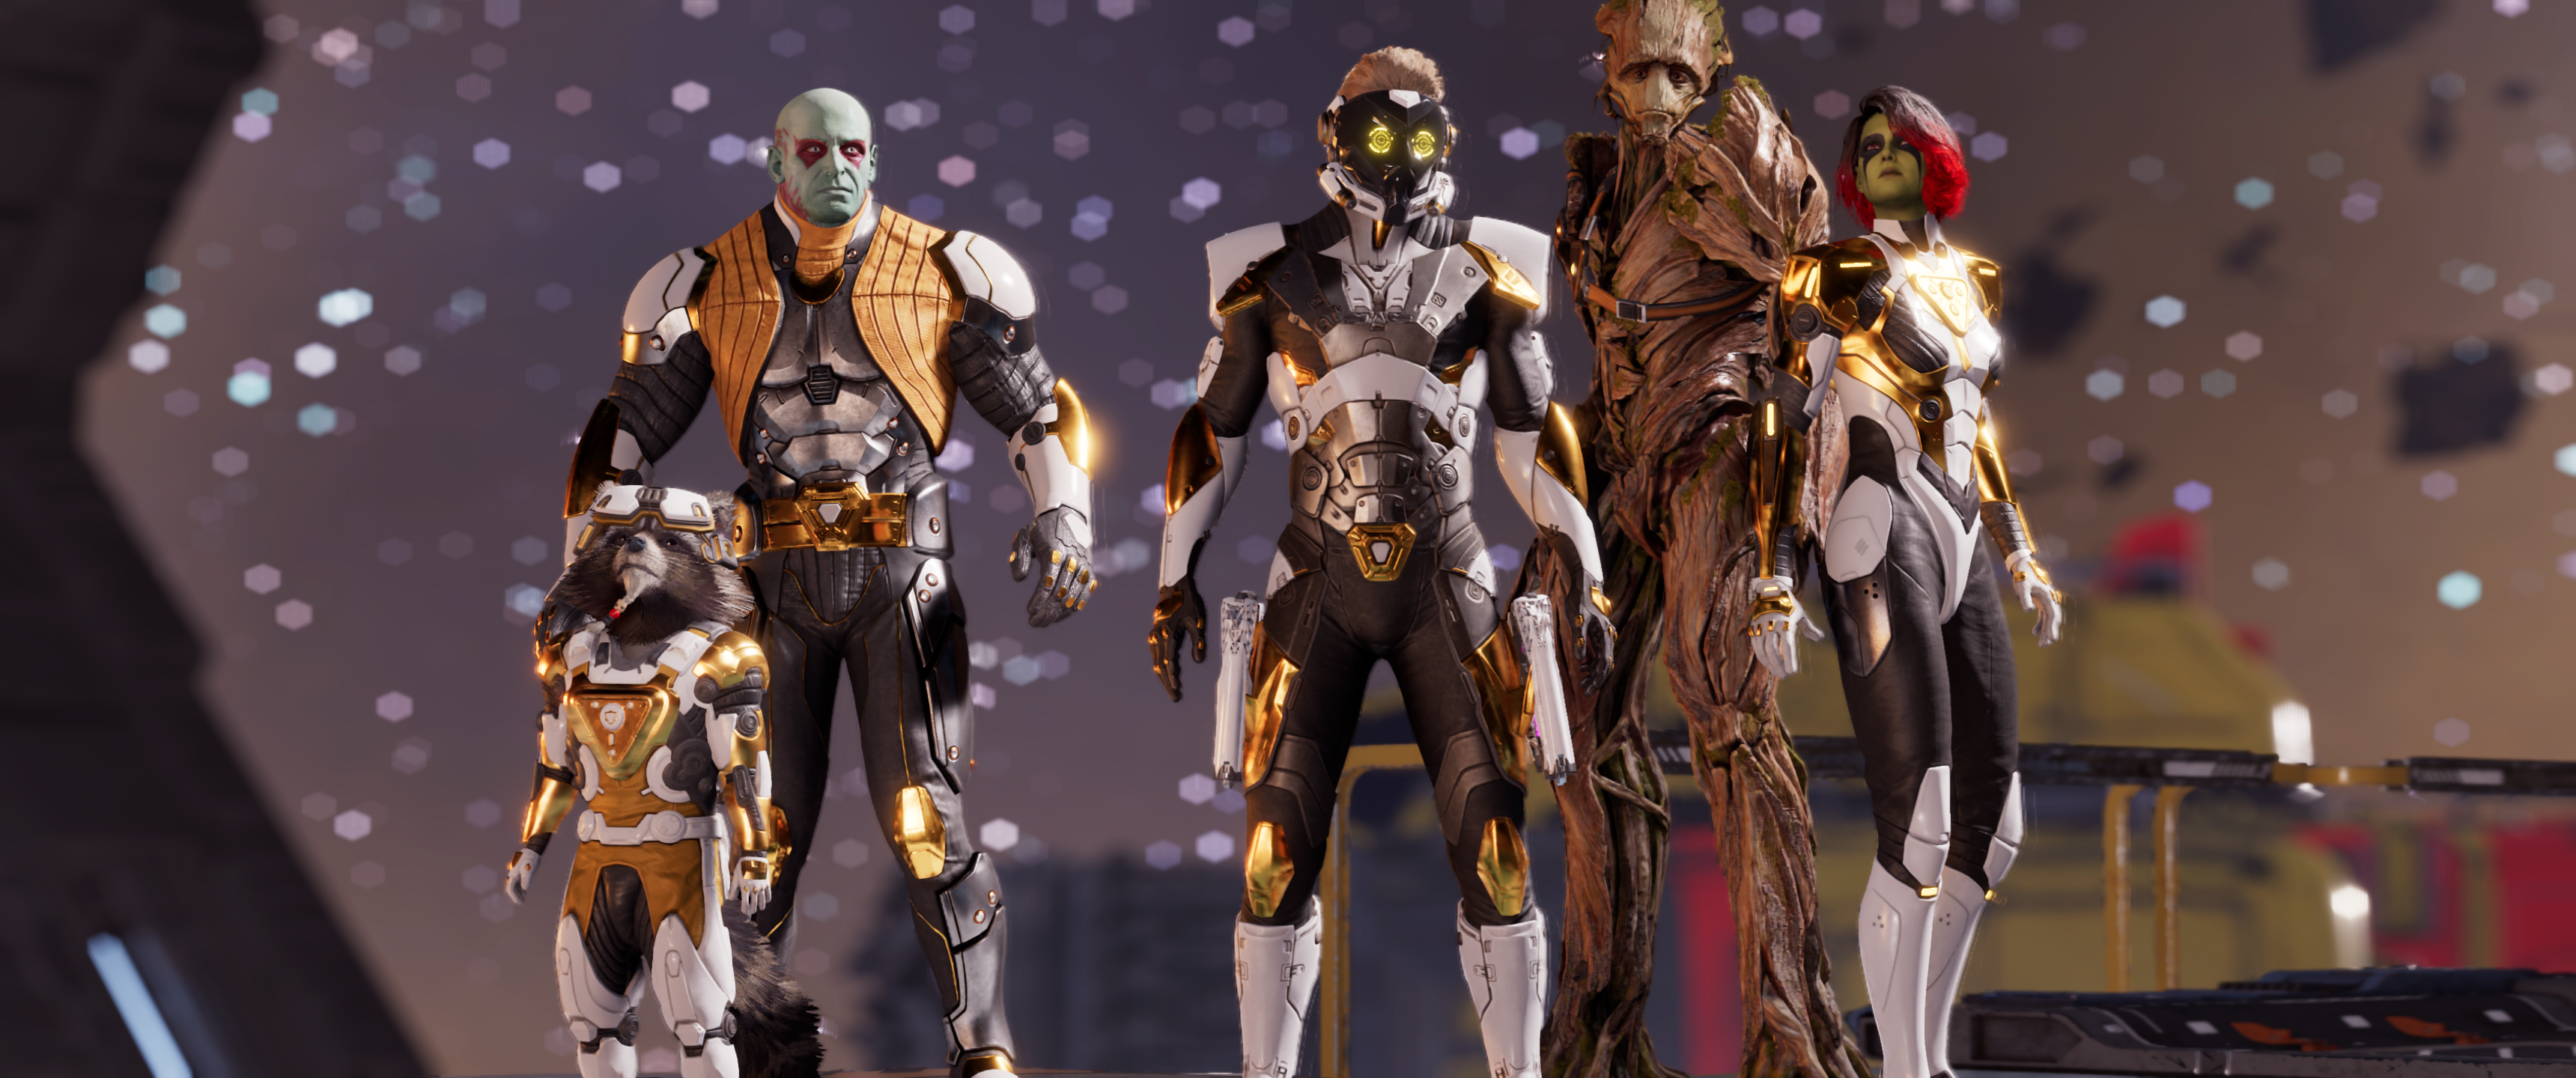 General 3440x1440 Guardians of the Galaxy video game characters universe video games